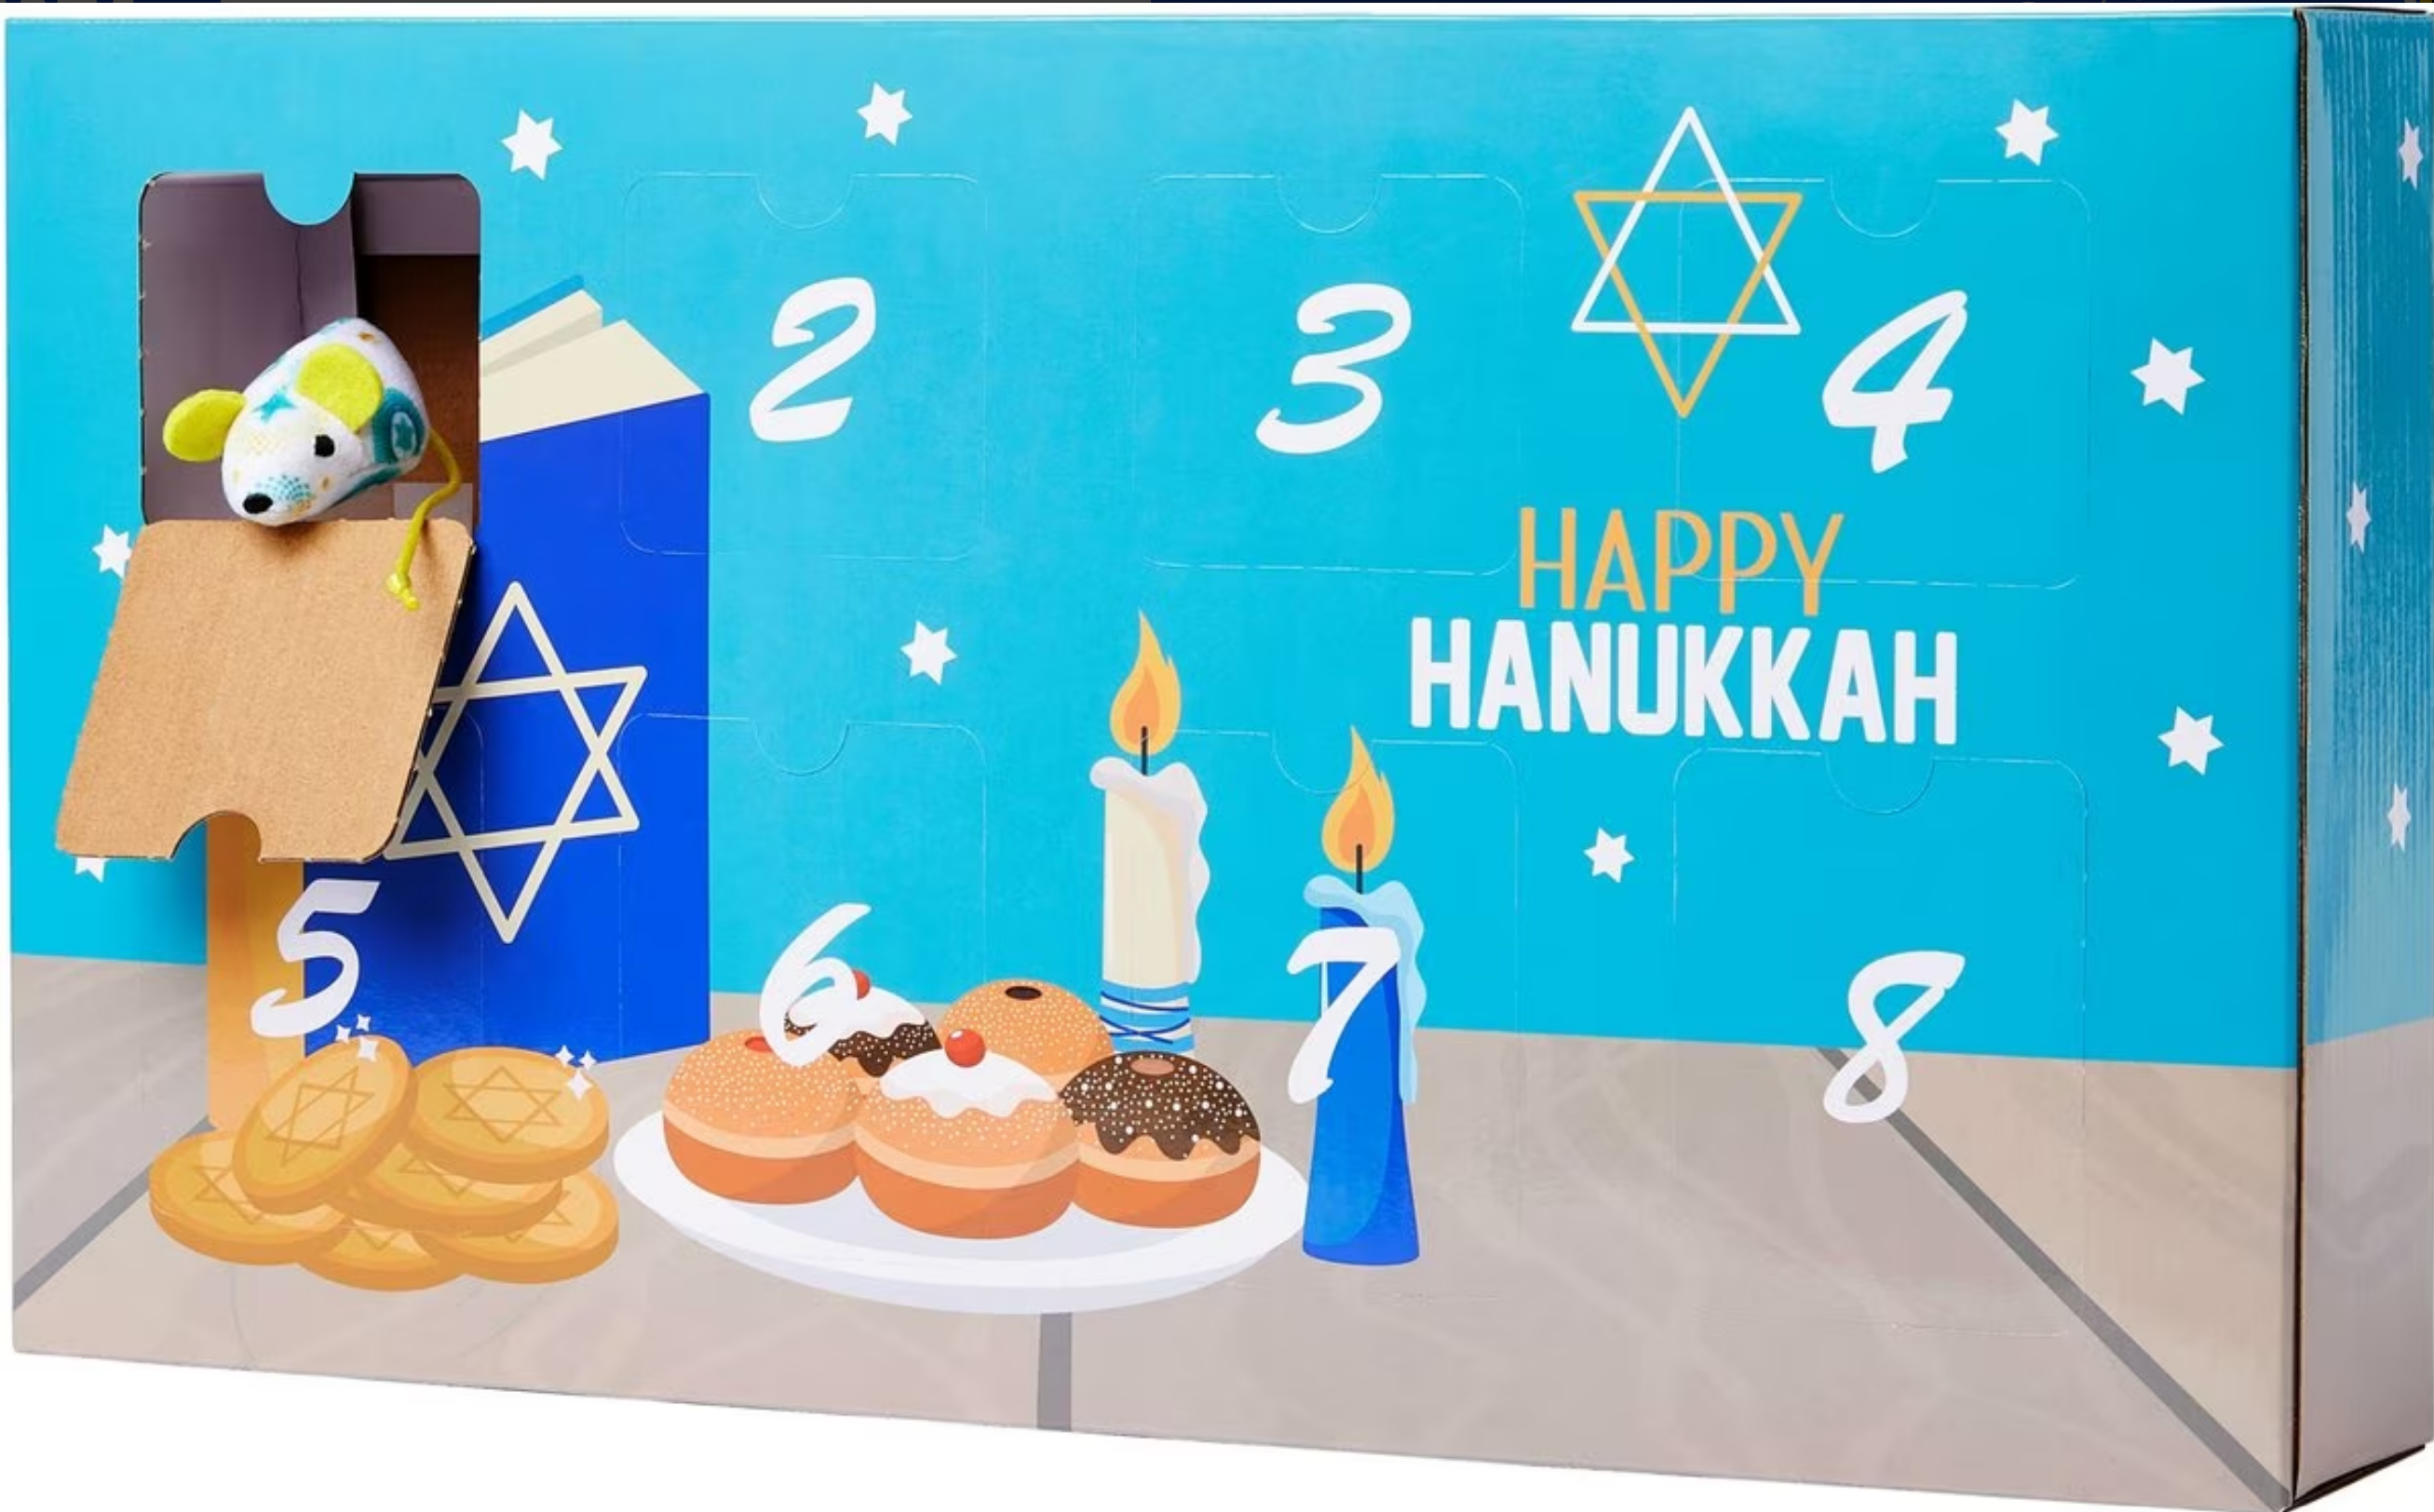 Frisco Holiday 8 Days of Hanukkah Cardboard Calendar with Toys for Cats